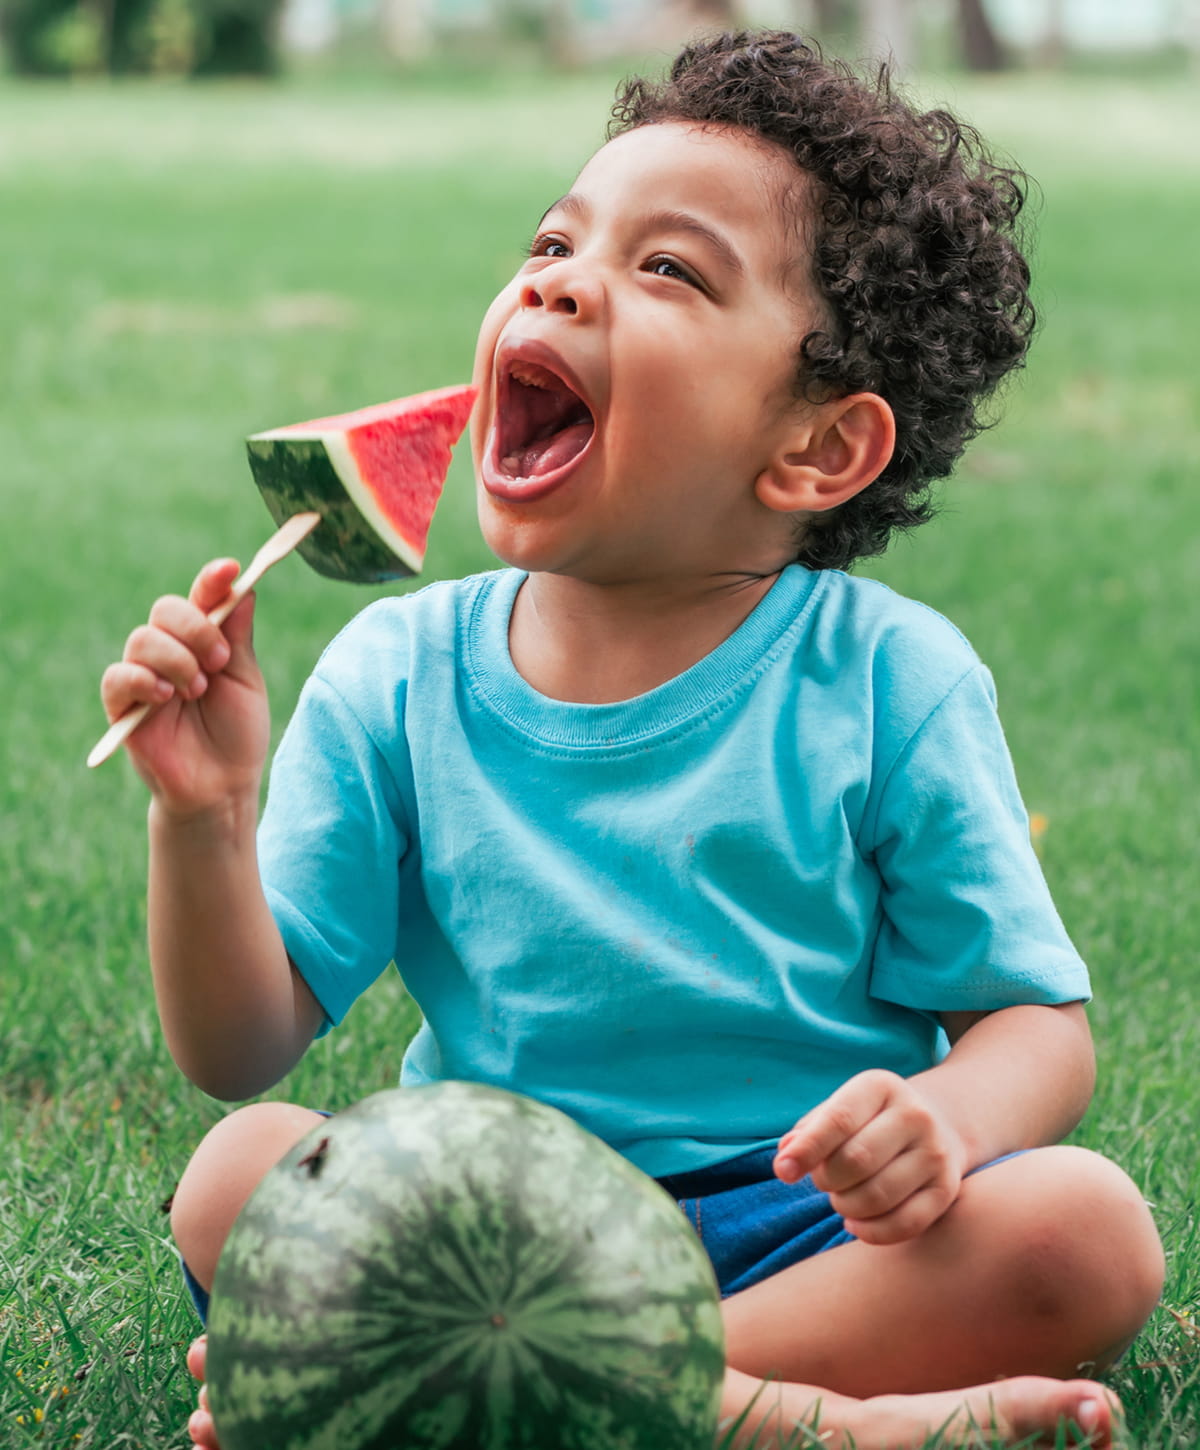 San Diego food allergies models mother and son eating watermelon